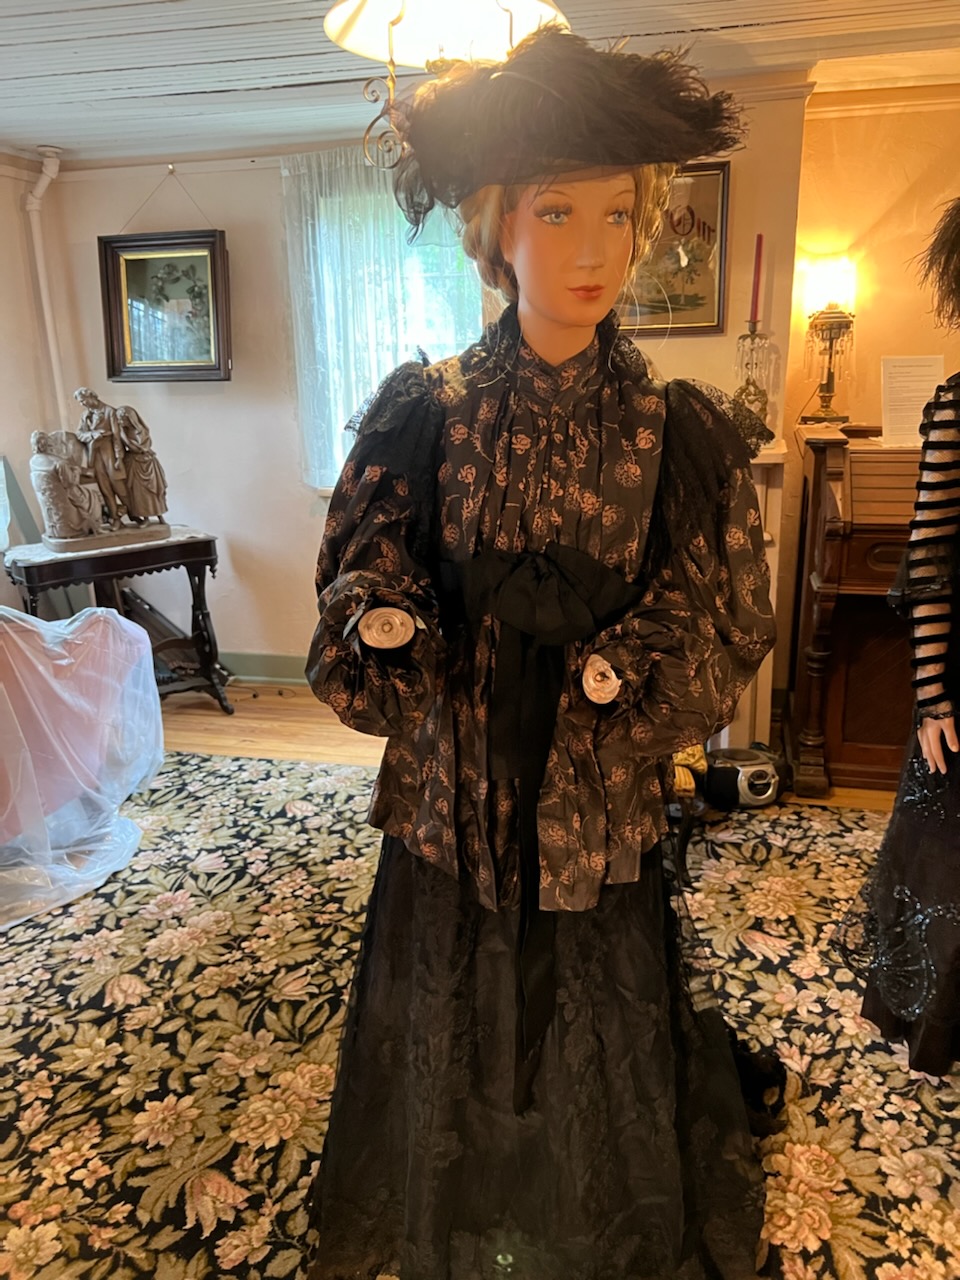 Lady's dress from the turn of the century.